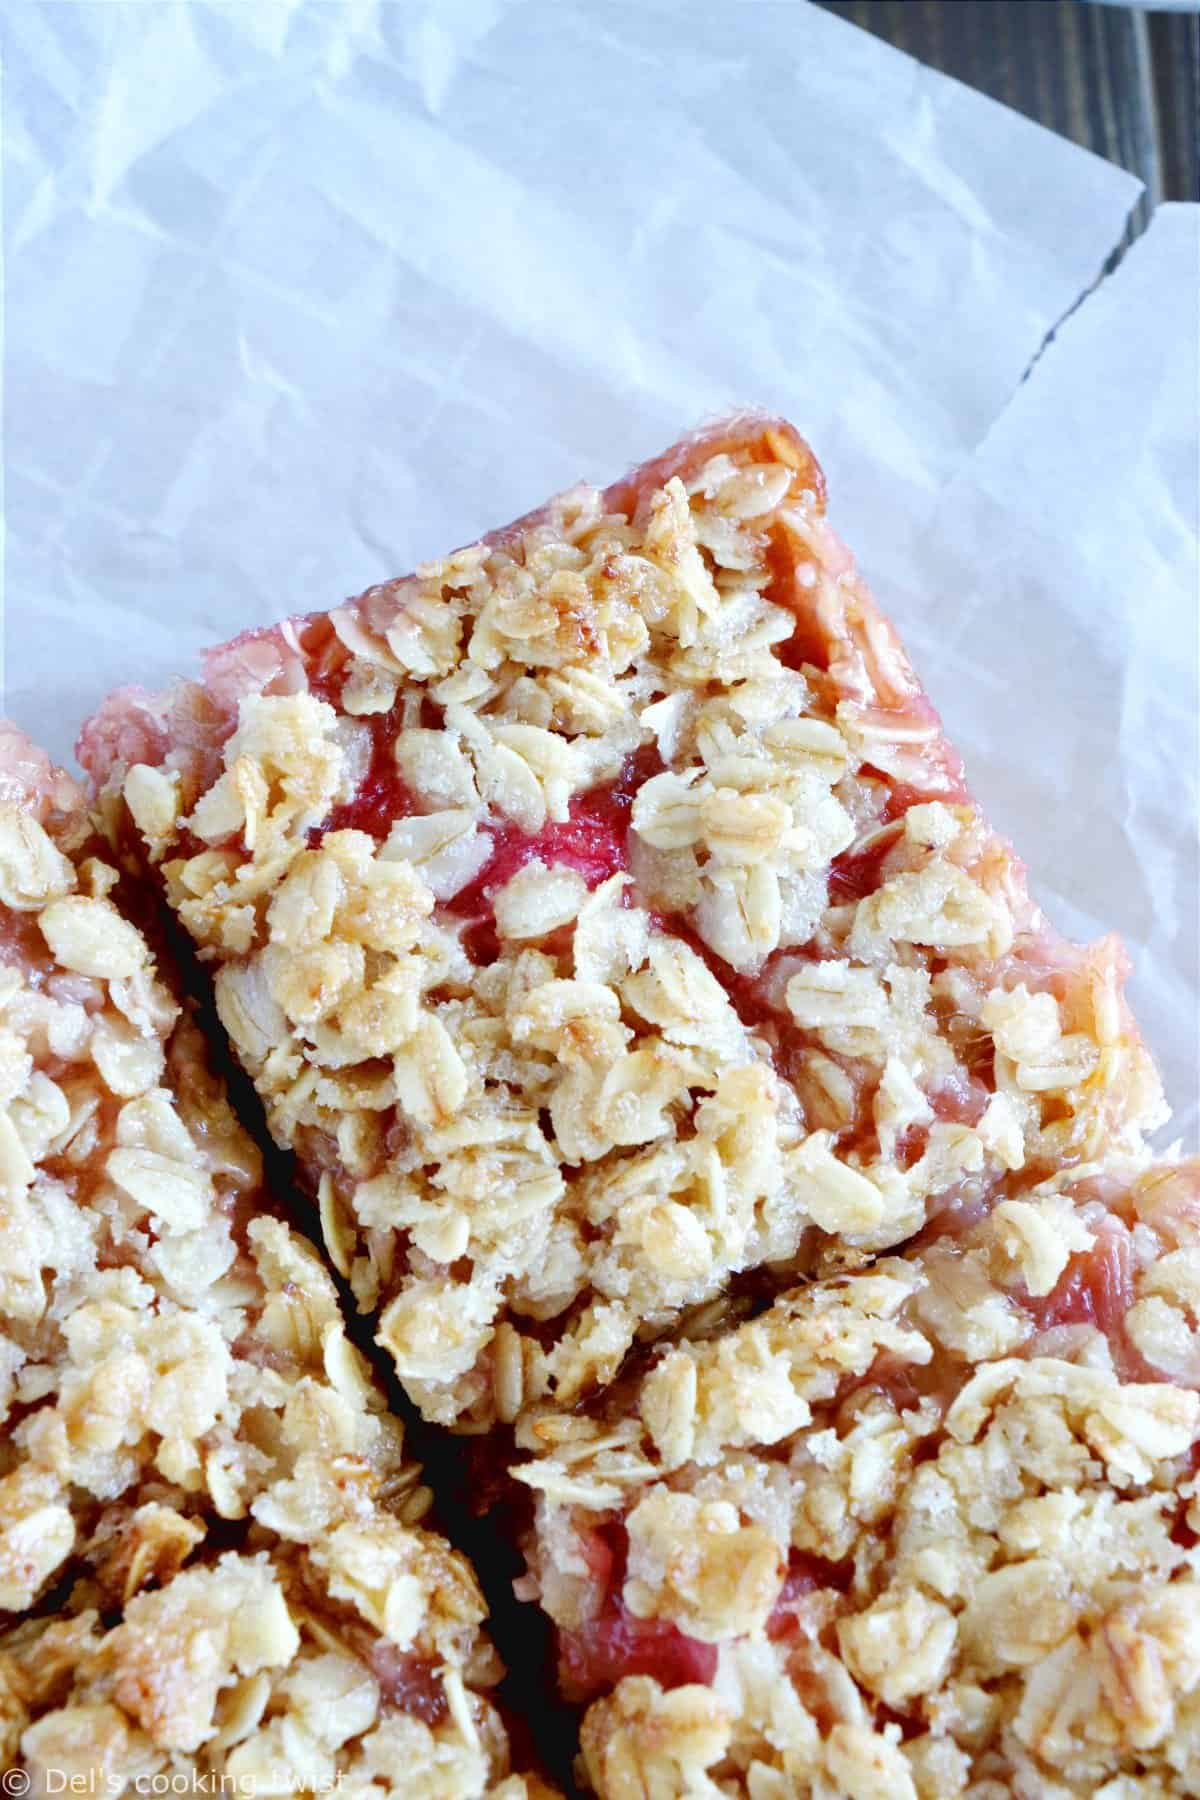 Rhubarb Crumble Bars are a must bake summer dessert recipe. They feature a thick and generous base, a juicy, sweet and tart rhubarb compote, and a crispy oat crumble on top.